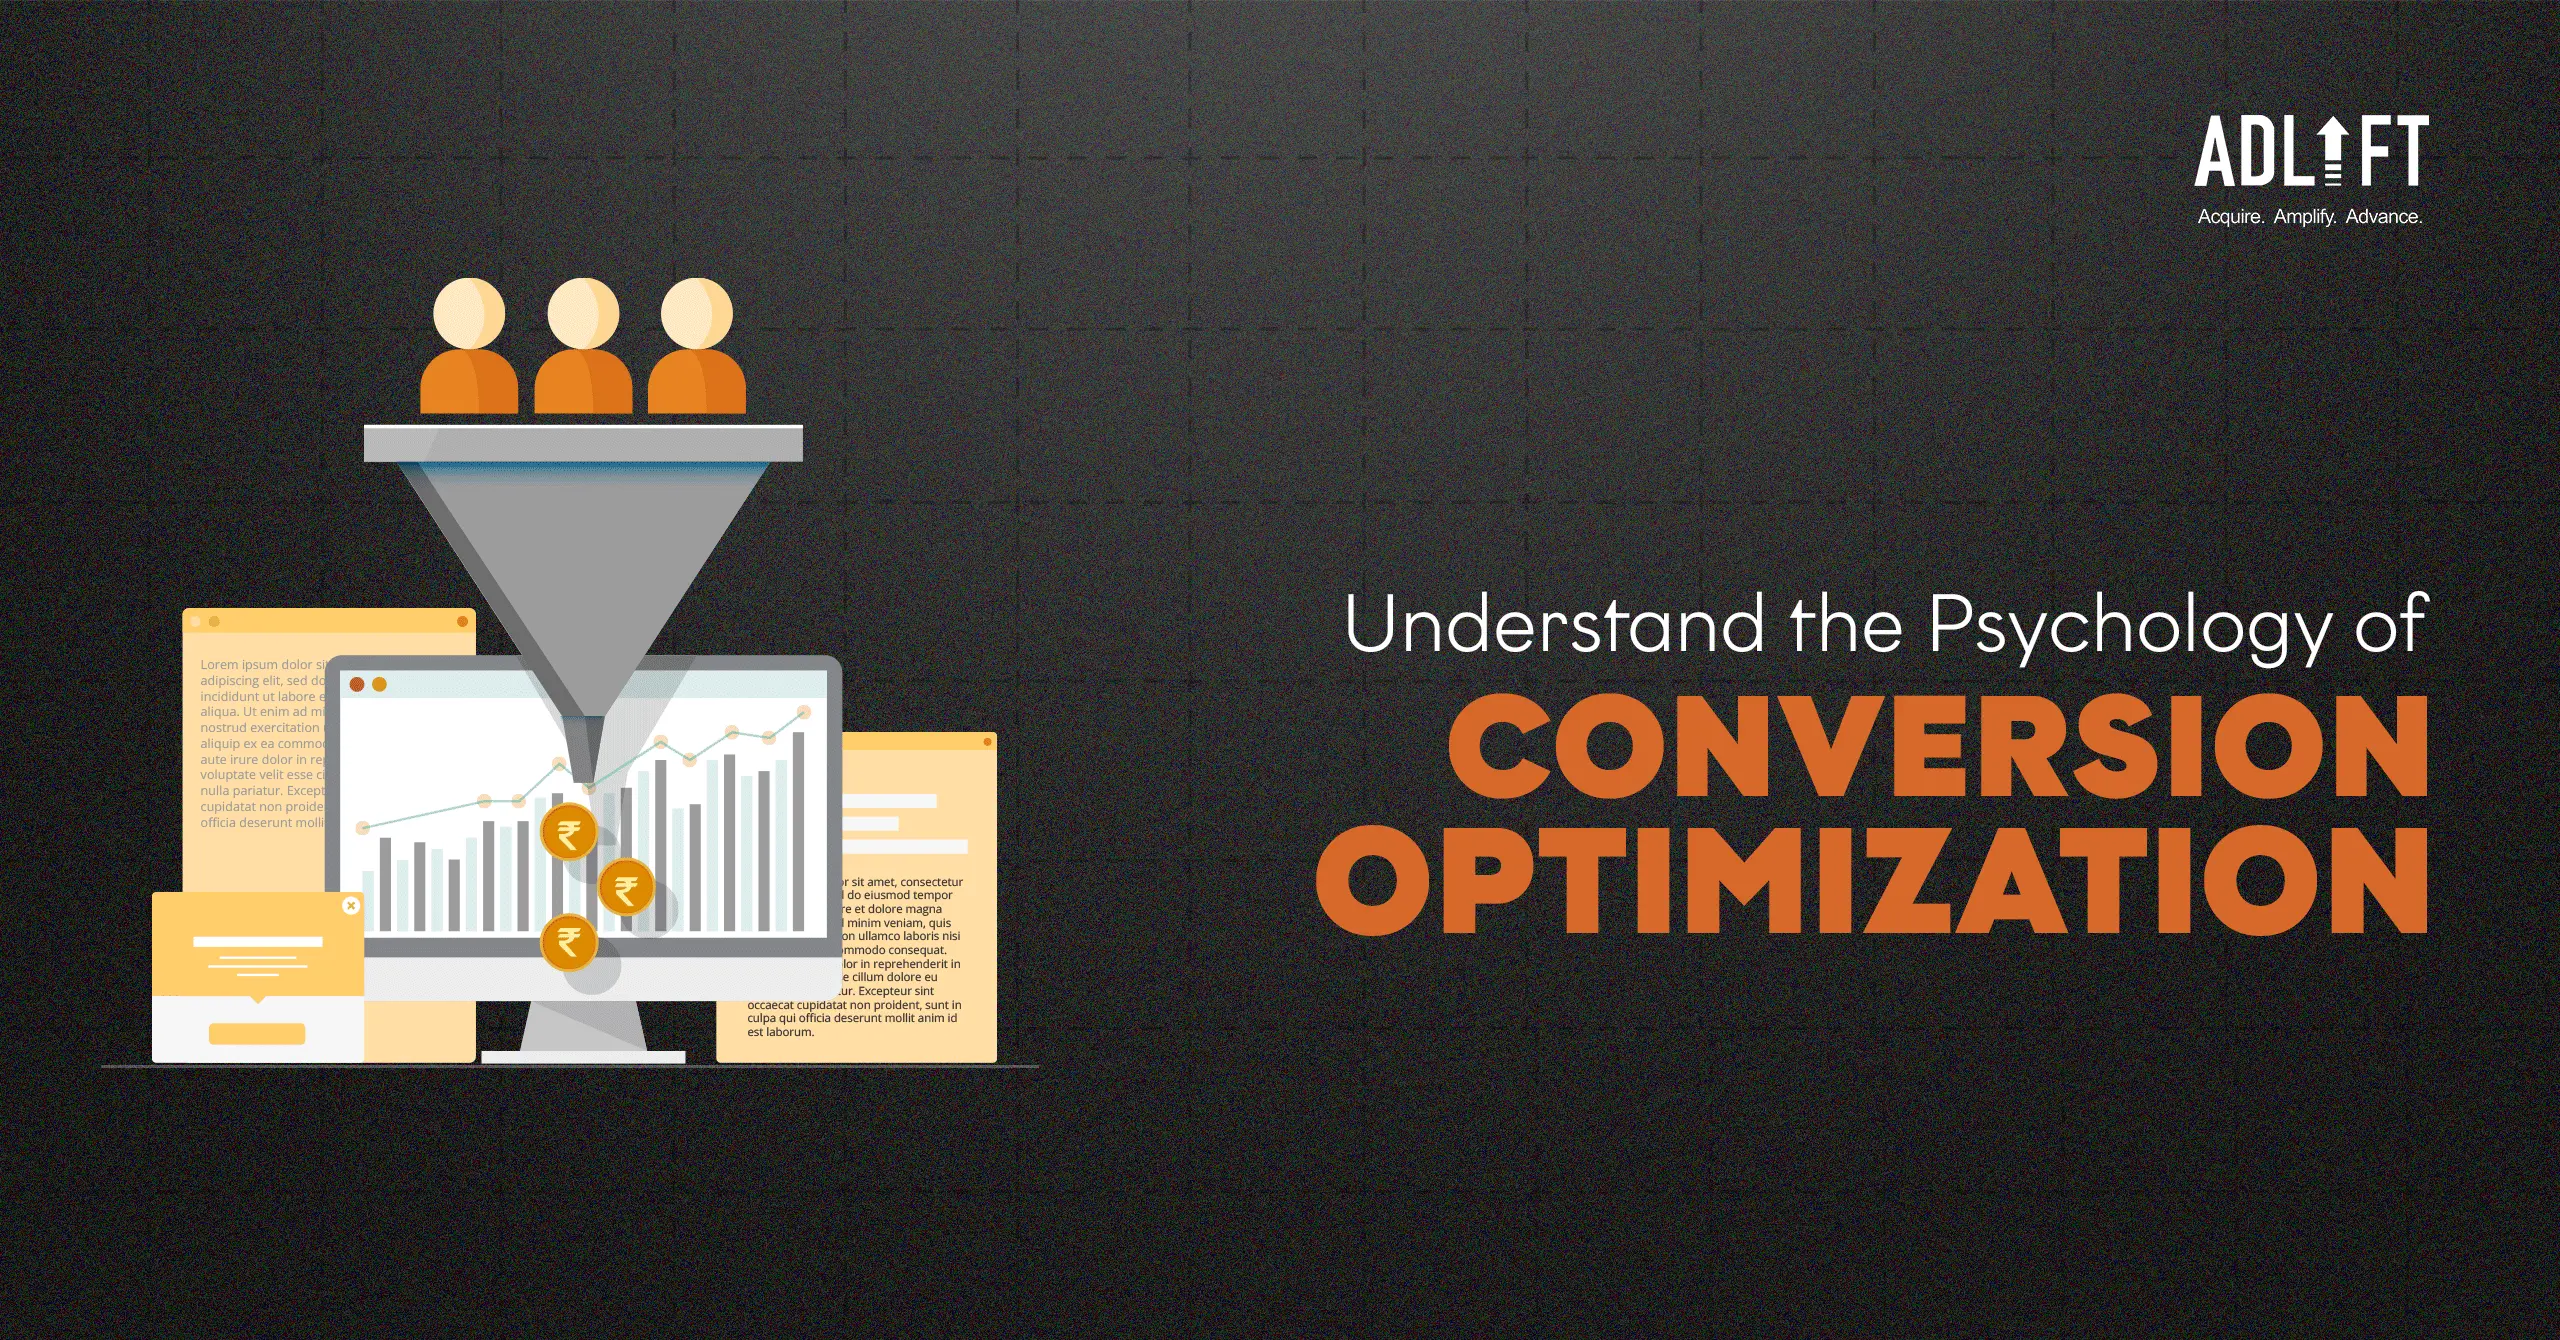 Conversion Rate Optimization: What Works and Why?